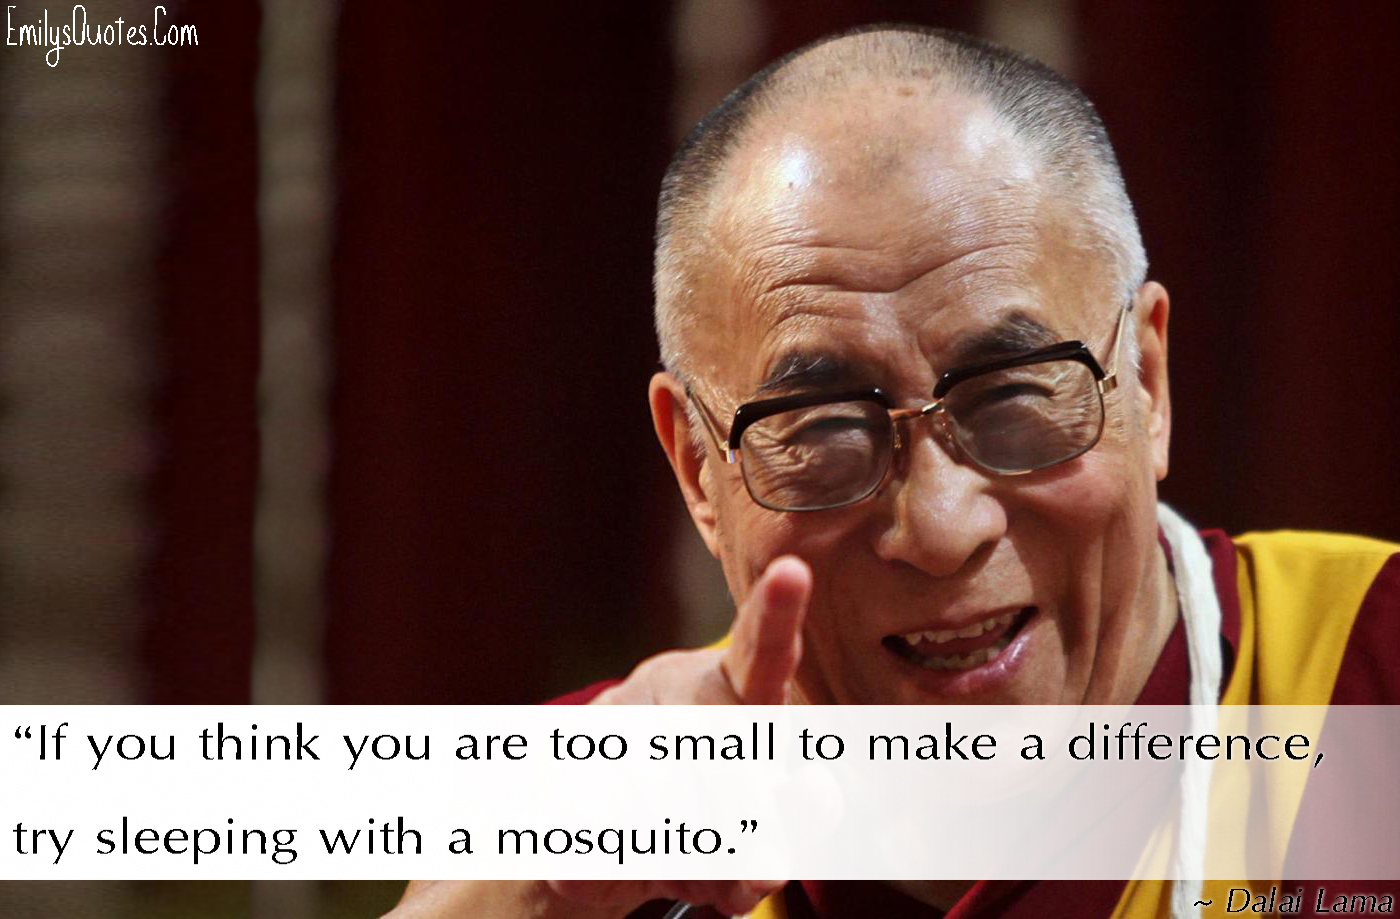 If you think you are too small to make a difference, try sleeping with a mosquito